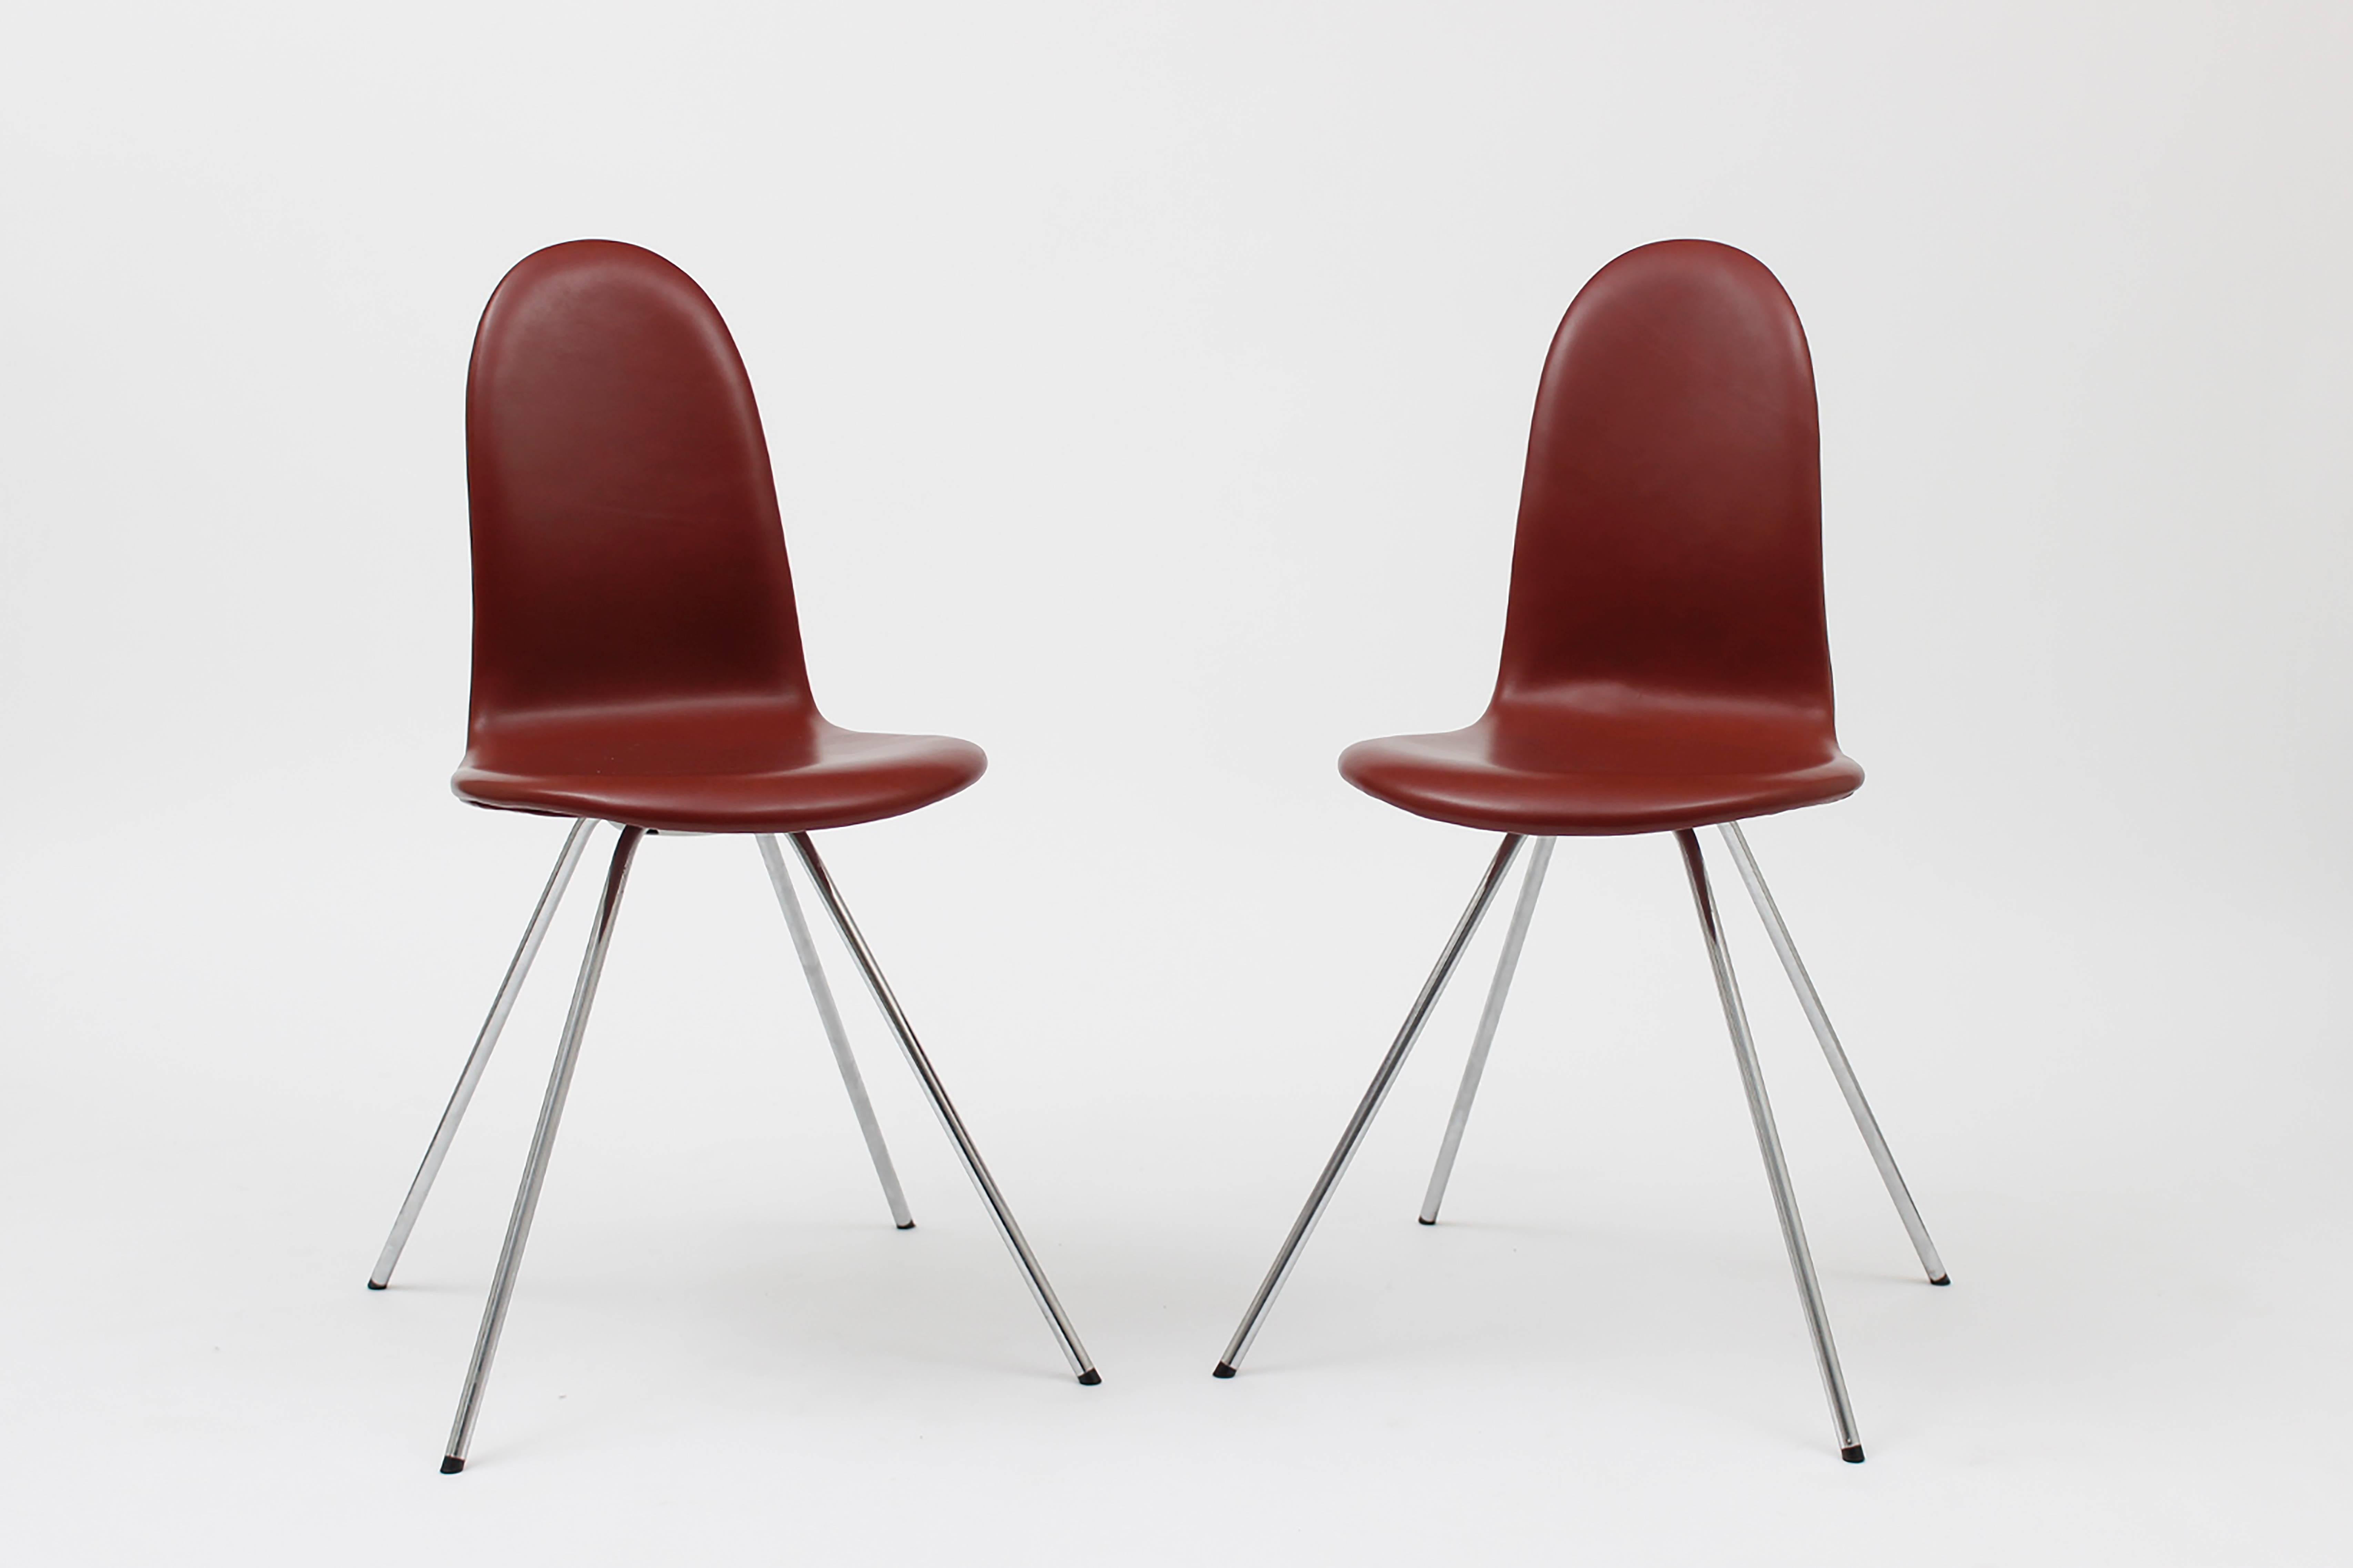 Beautiful pair of Tongue chairs designed by Arne Jacobsen in 1955. This pair is a 1970s edition by Fritz Hansen (marked) with this beautiful Indian red leather cover by Arne Sorensen and chrome-plated steel legs.